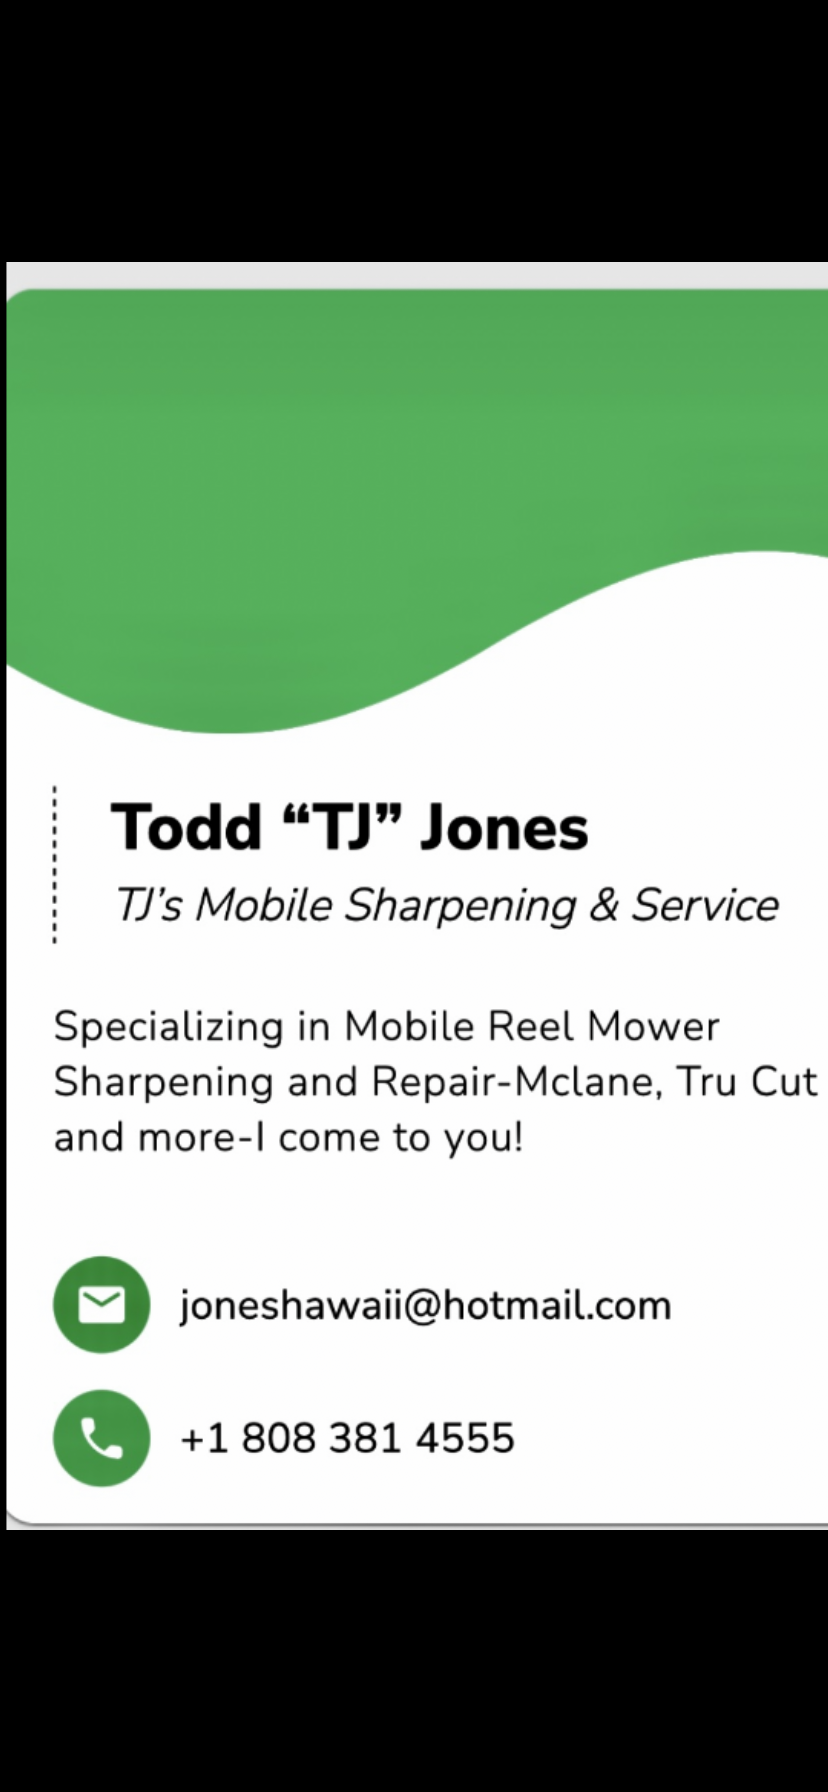 TJ's Mobile Sharpening, Service and Sales